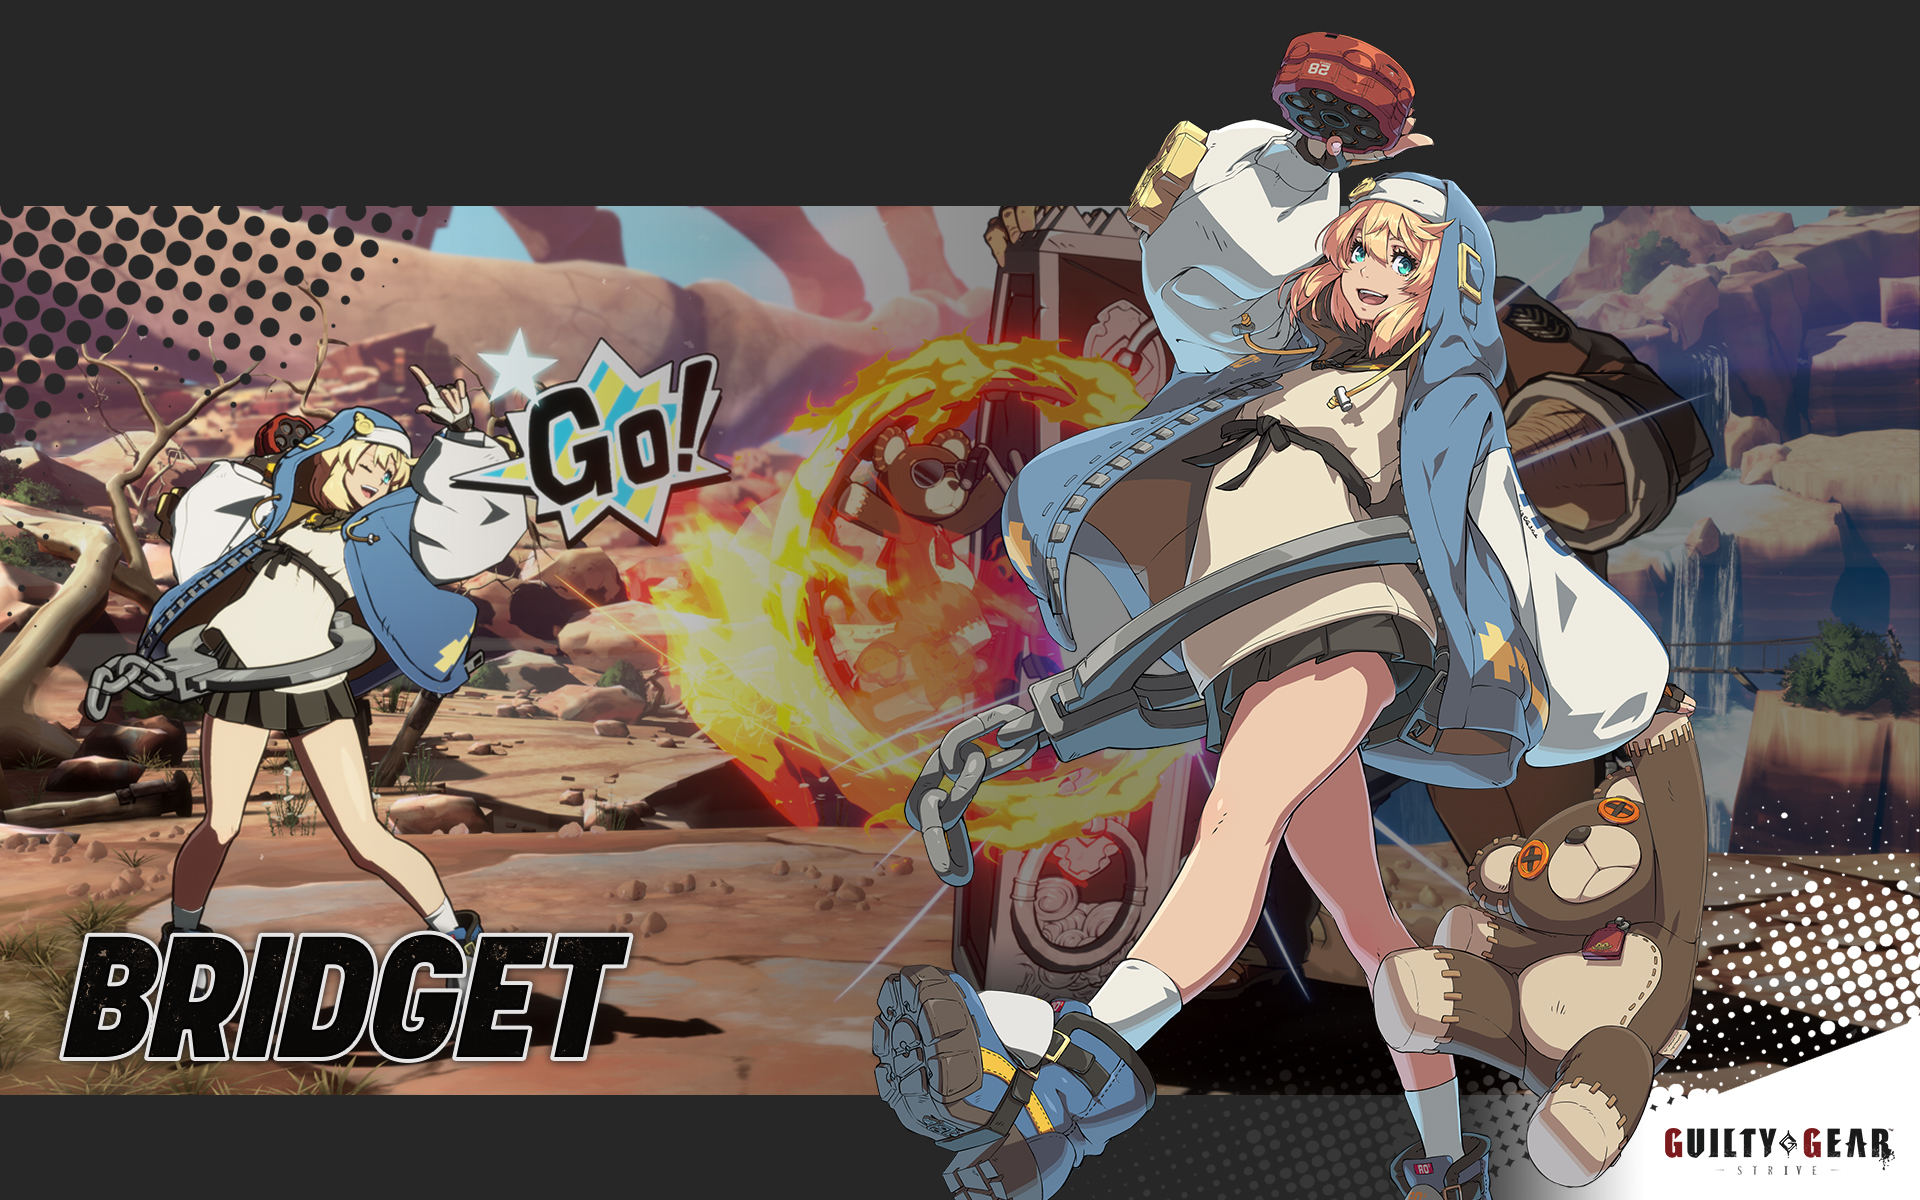 No way, they turned Bridget from Guilty Gear into a real thing? : r/bridget